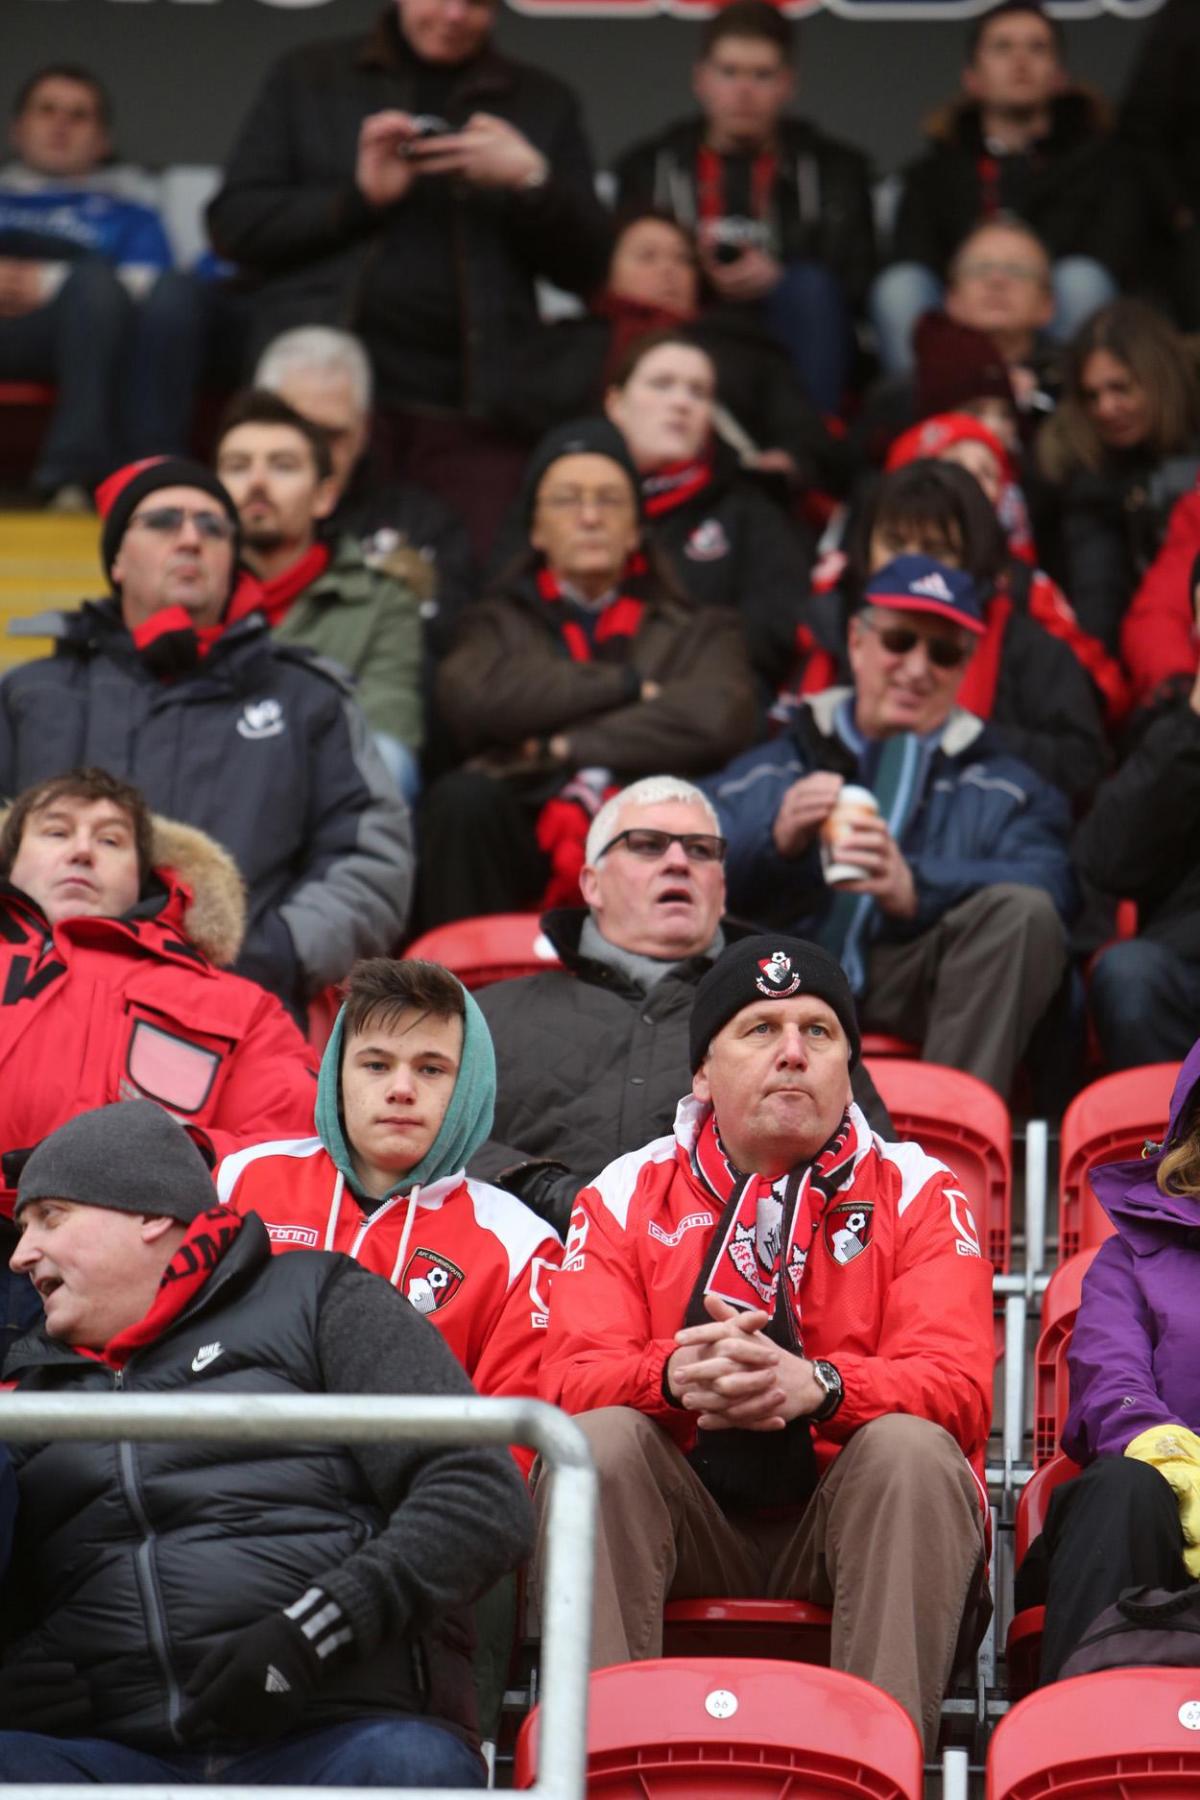 All the photos of the Cherries Fans in January 2015